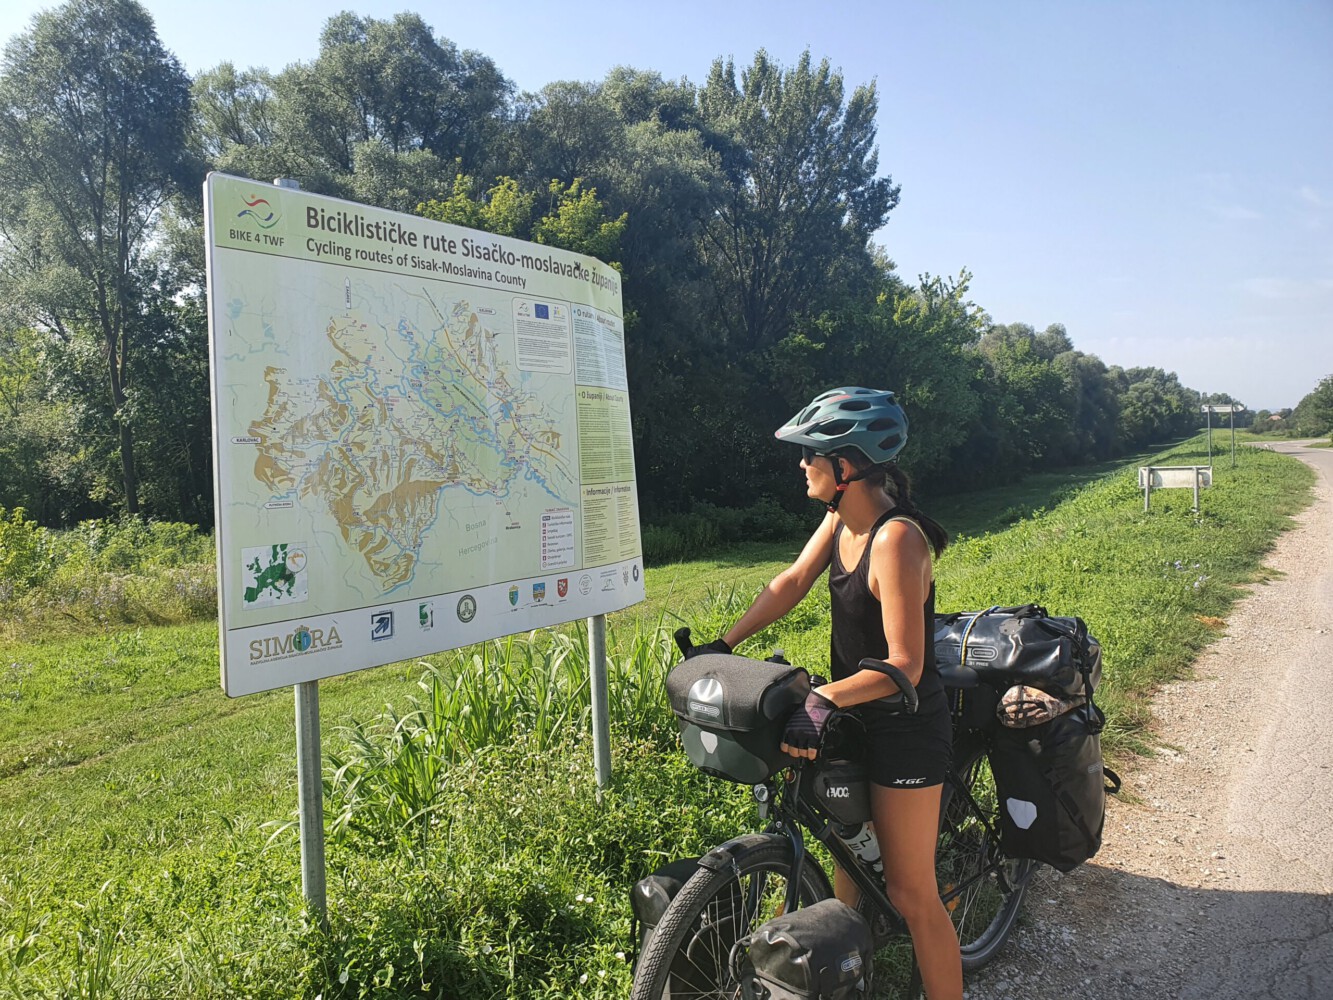 Alina at an information table with local bike tracks.